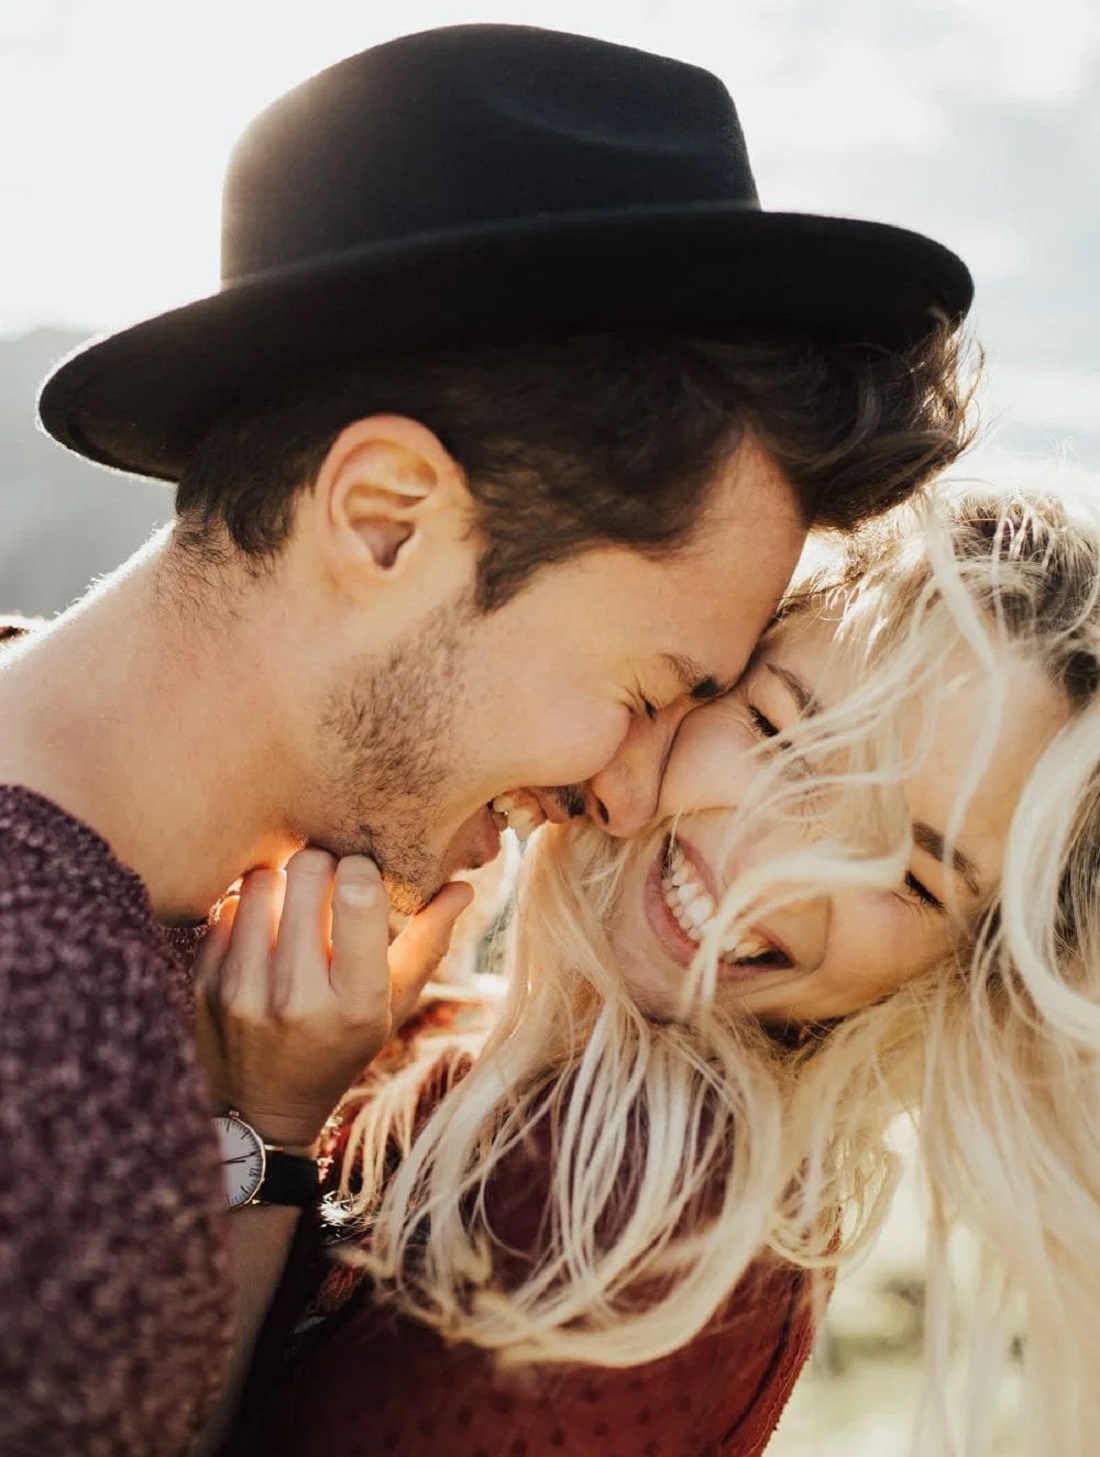 Keep Your Relationship Positive With These 9 Tips